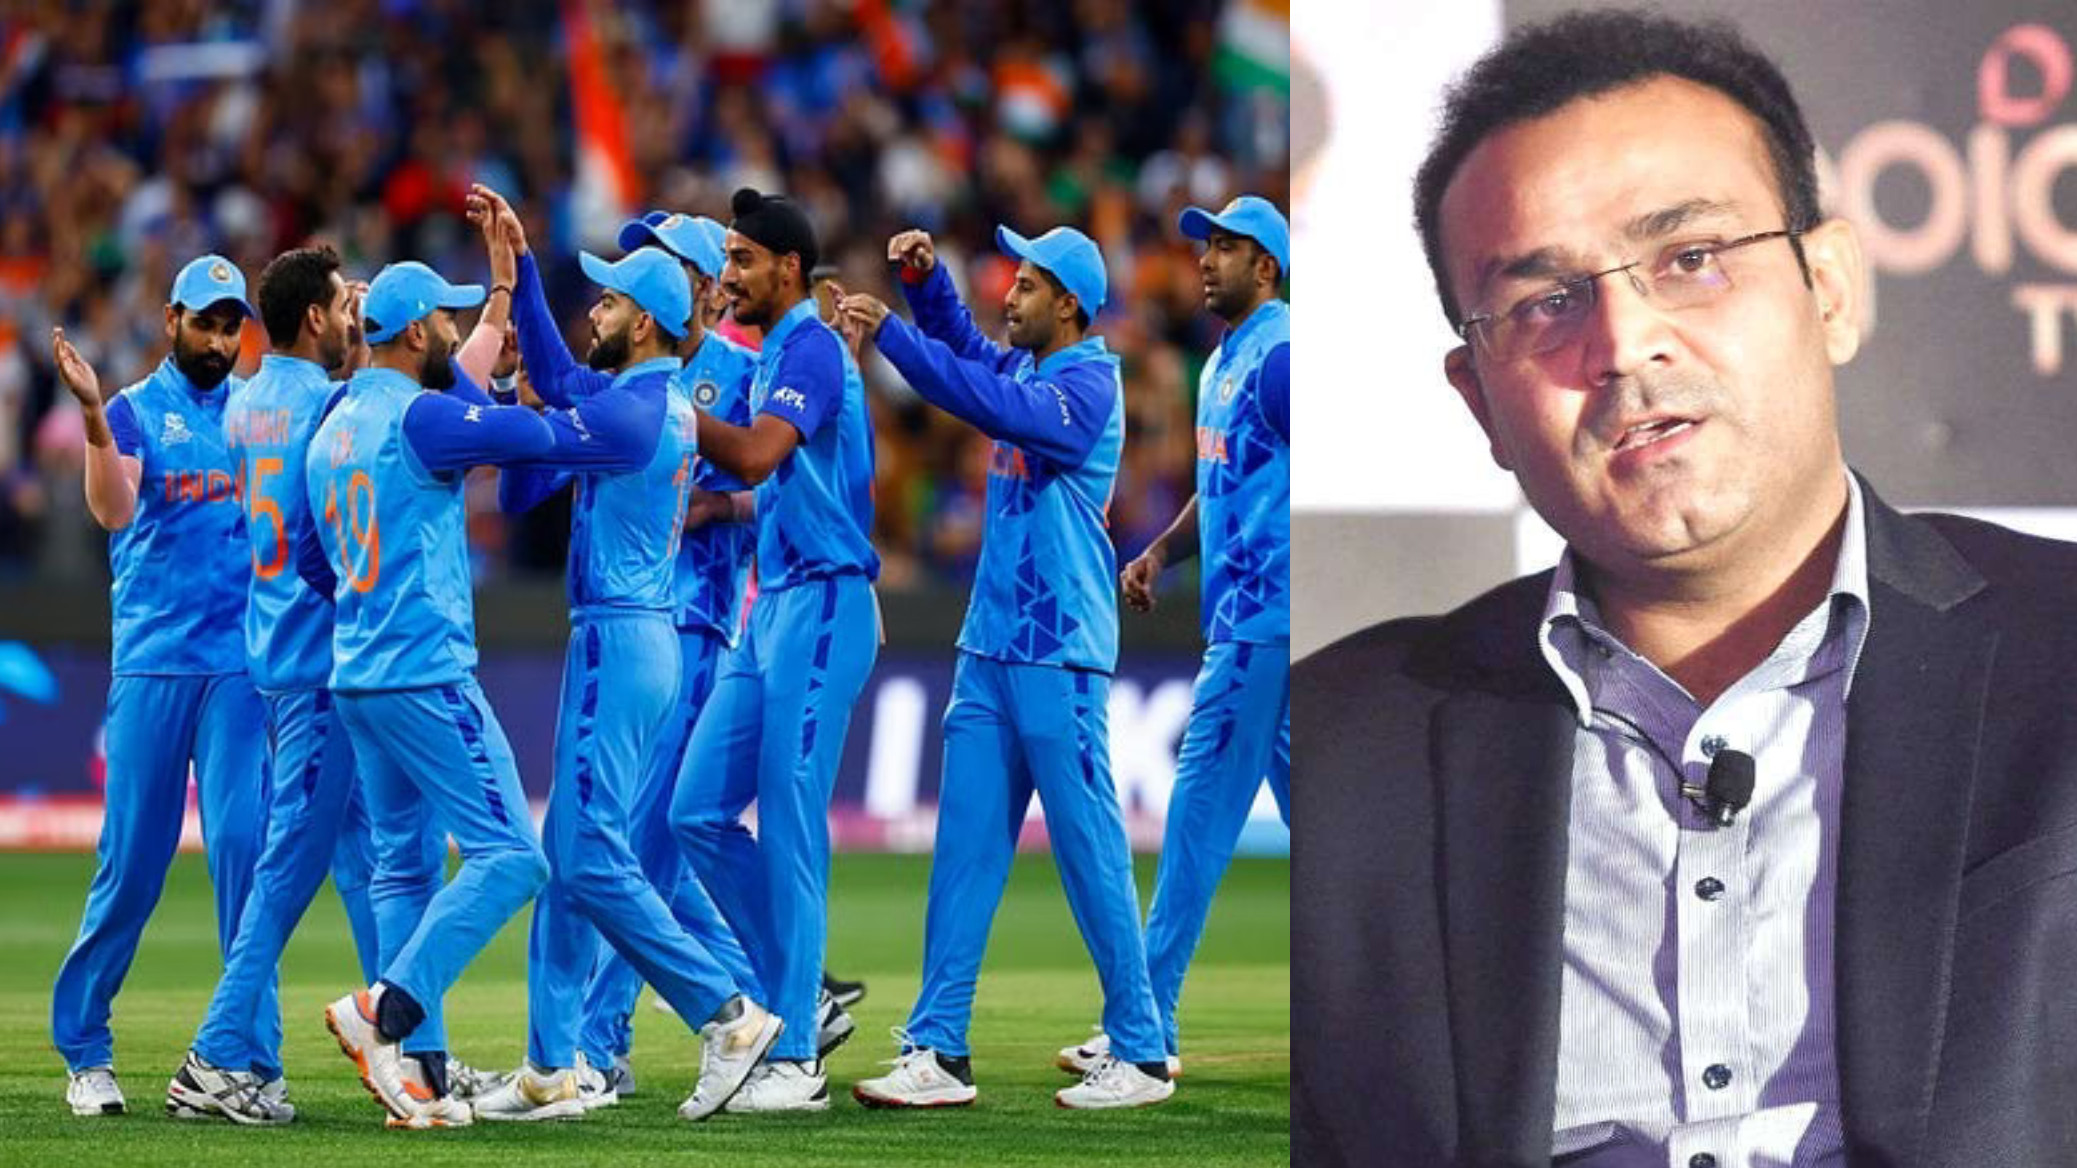 T20 World Cup 2022: ‘India provides high-standard hospitality’- Sehwag unhappy with Team India getting cold food in Sydney